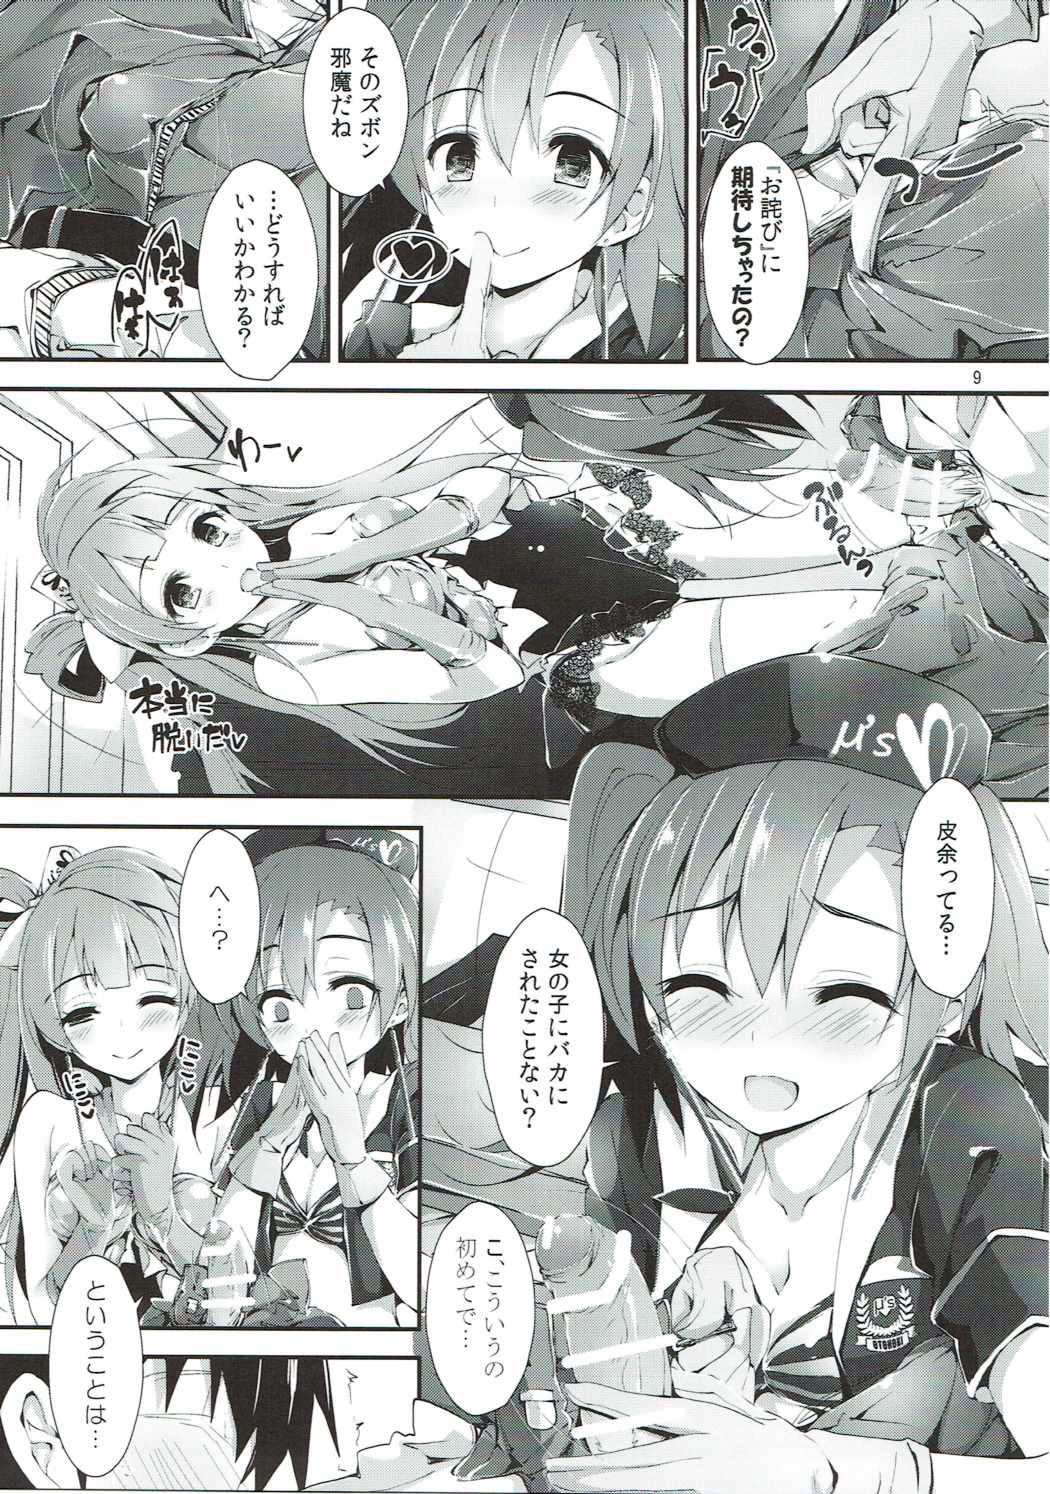 Urine No regred payls - Love live Groupsex - Page 8